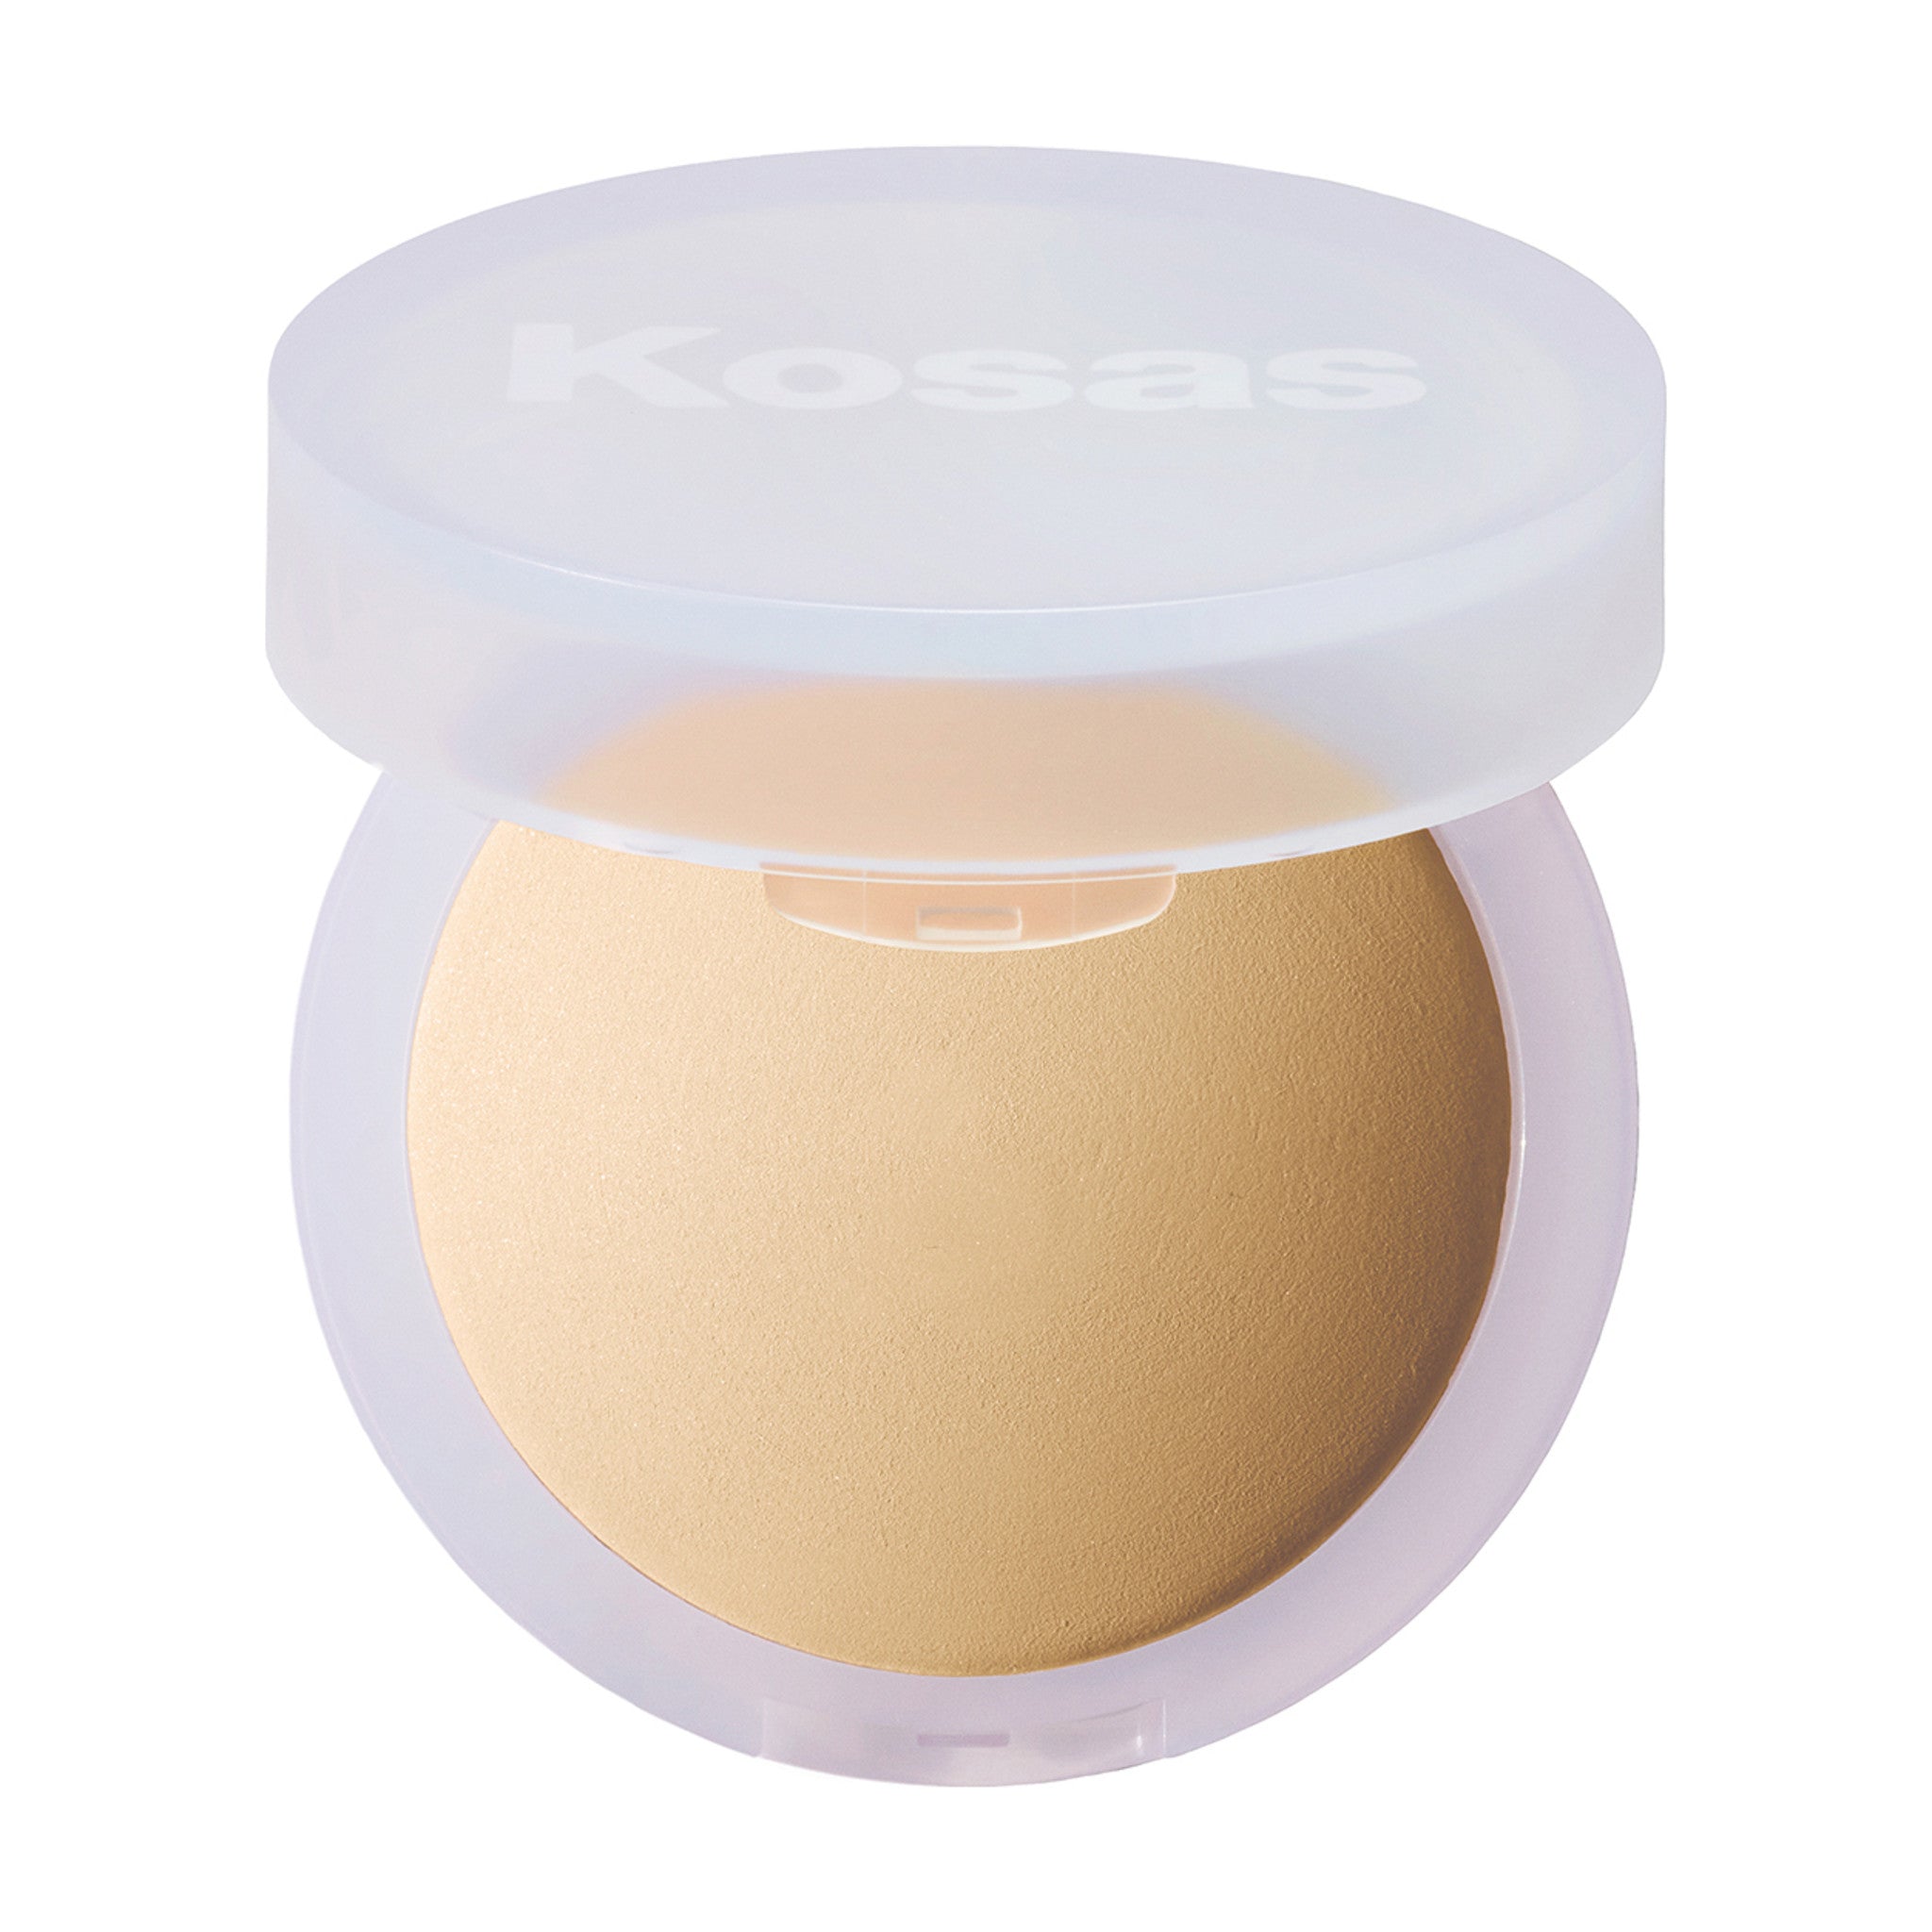 Kosas Cloud Set Baked Setting and Smoothing Powder Color/Shade variant: Cushiony main image. This product is in the color nude